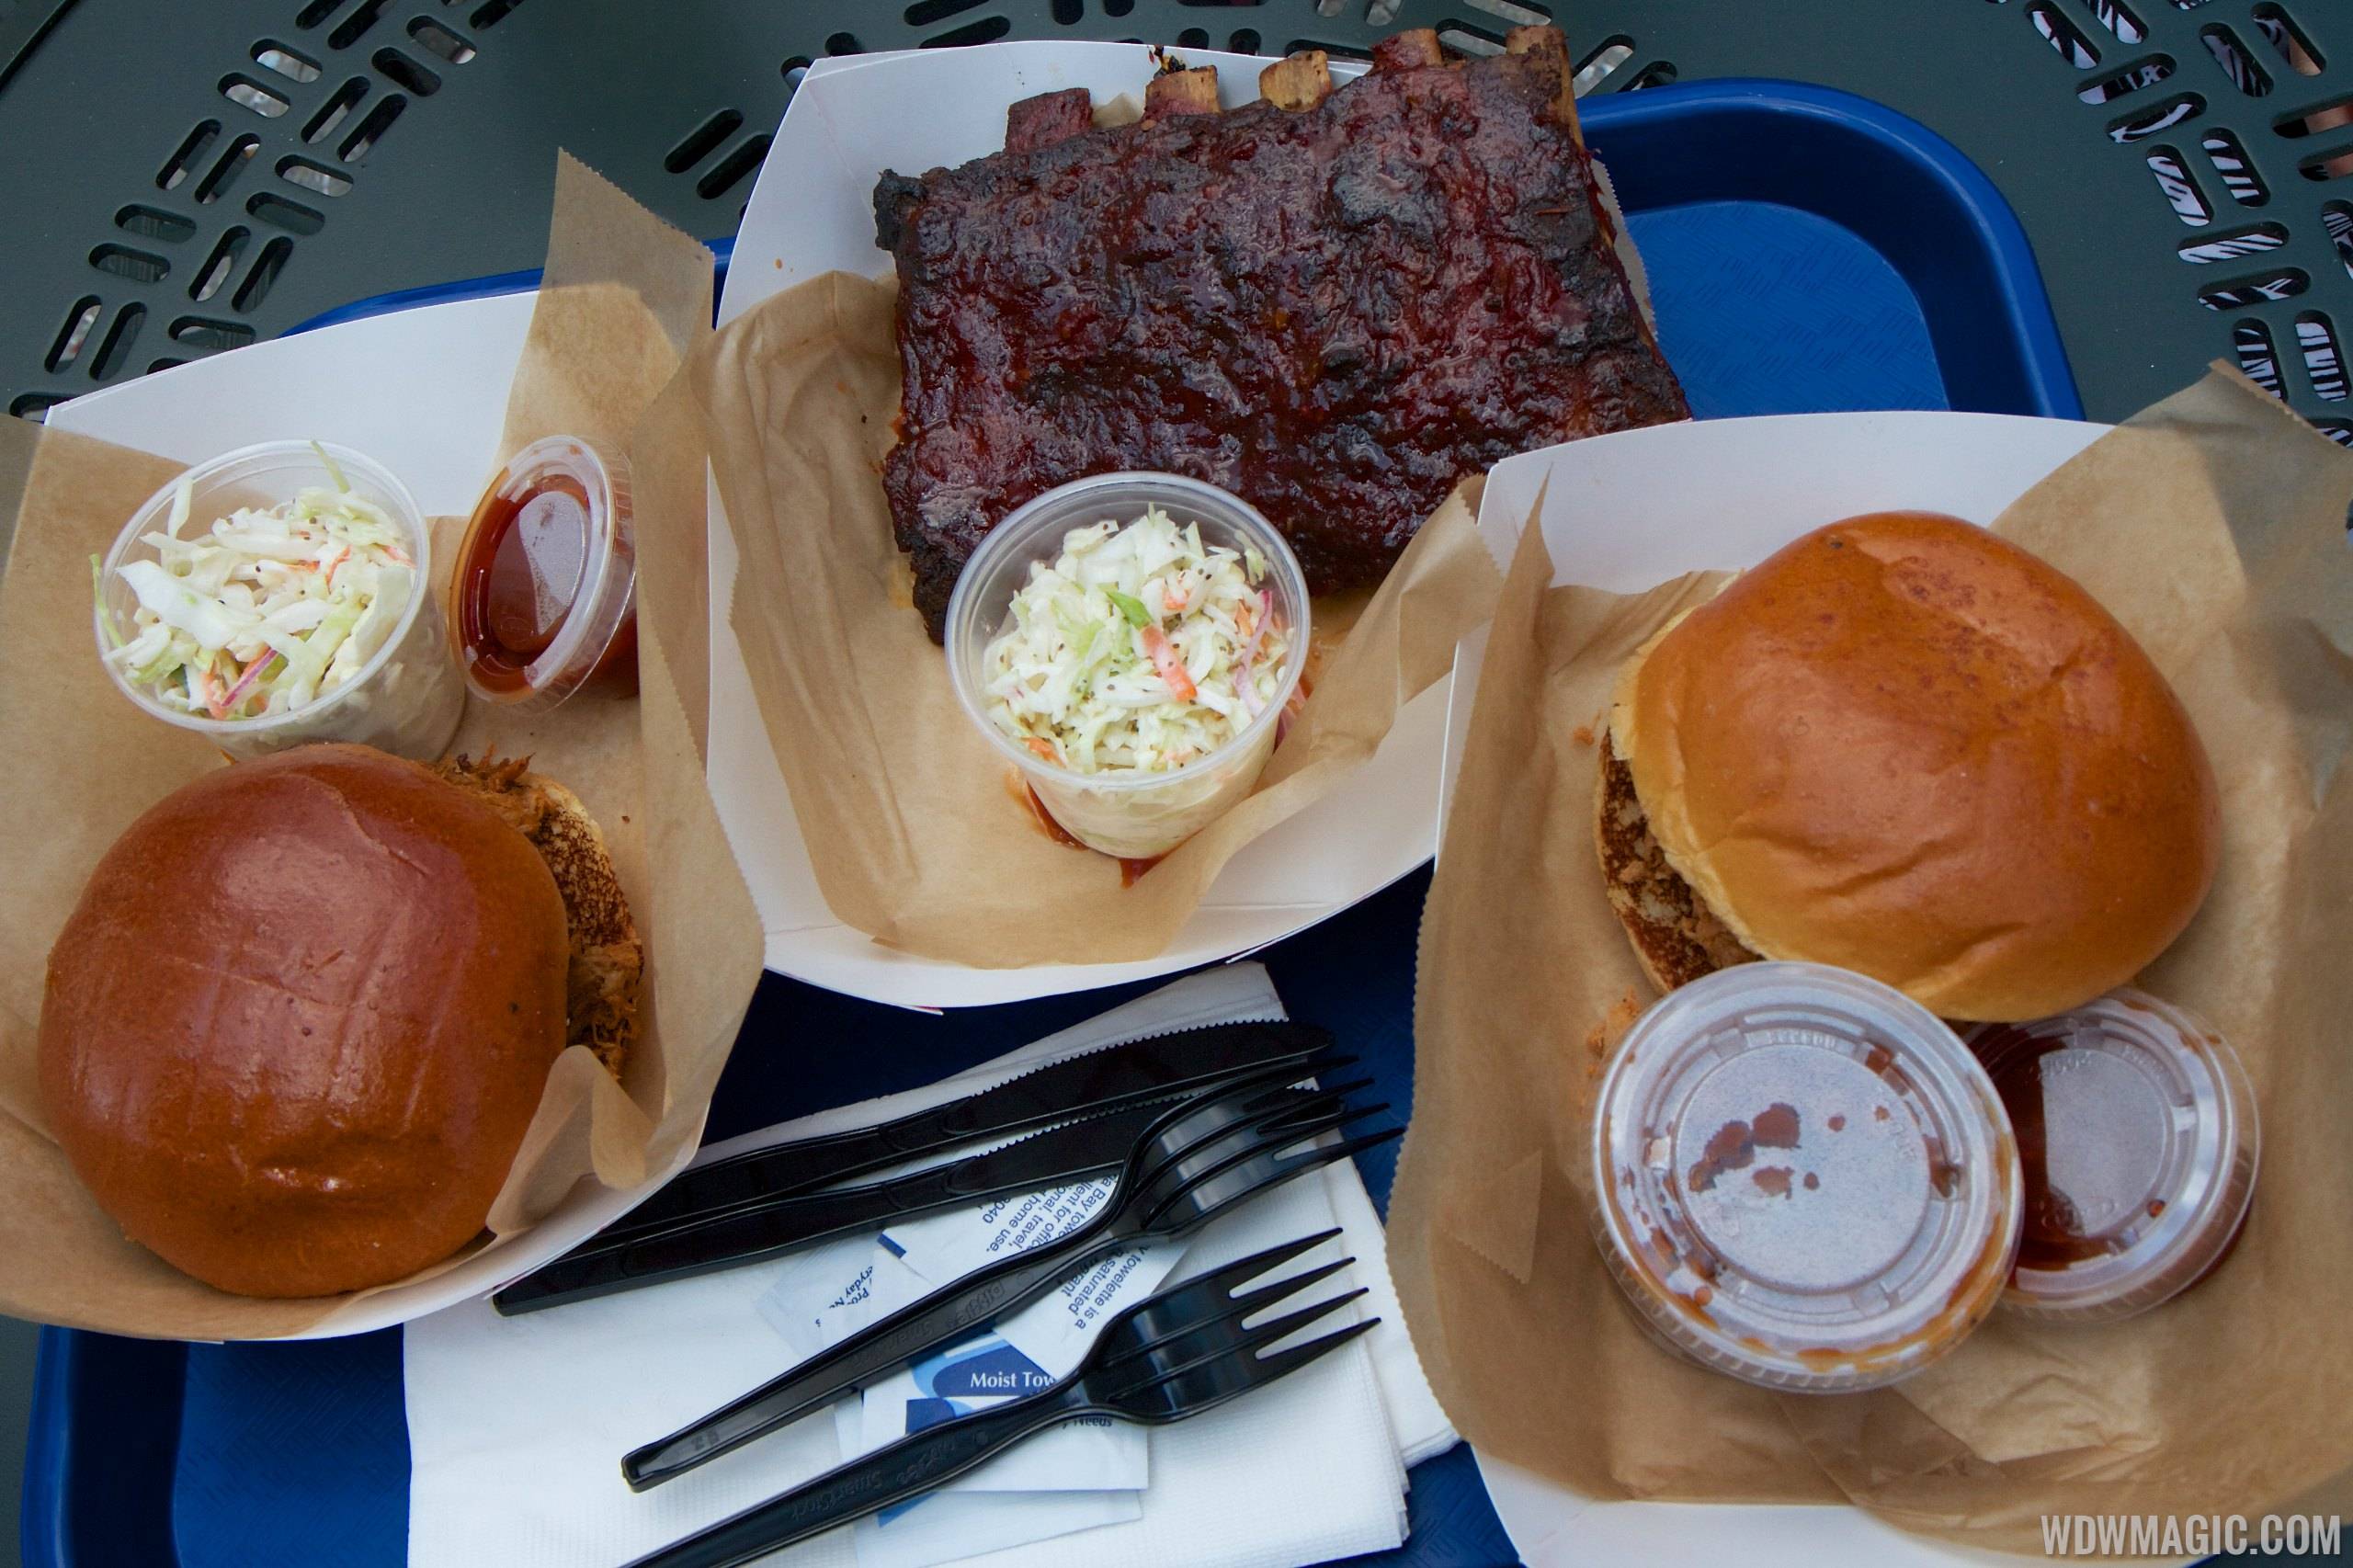 The Smokehouse - Pulled chicken, pulled pork and half rack of ribs